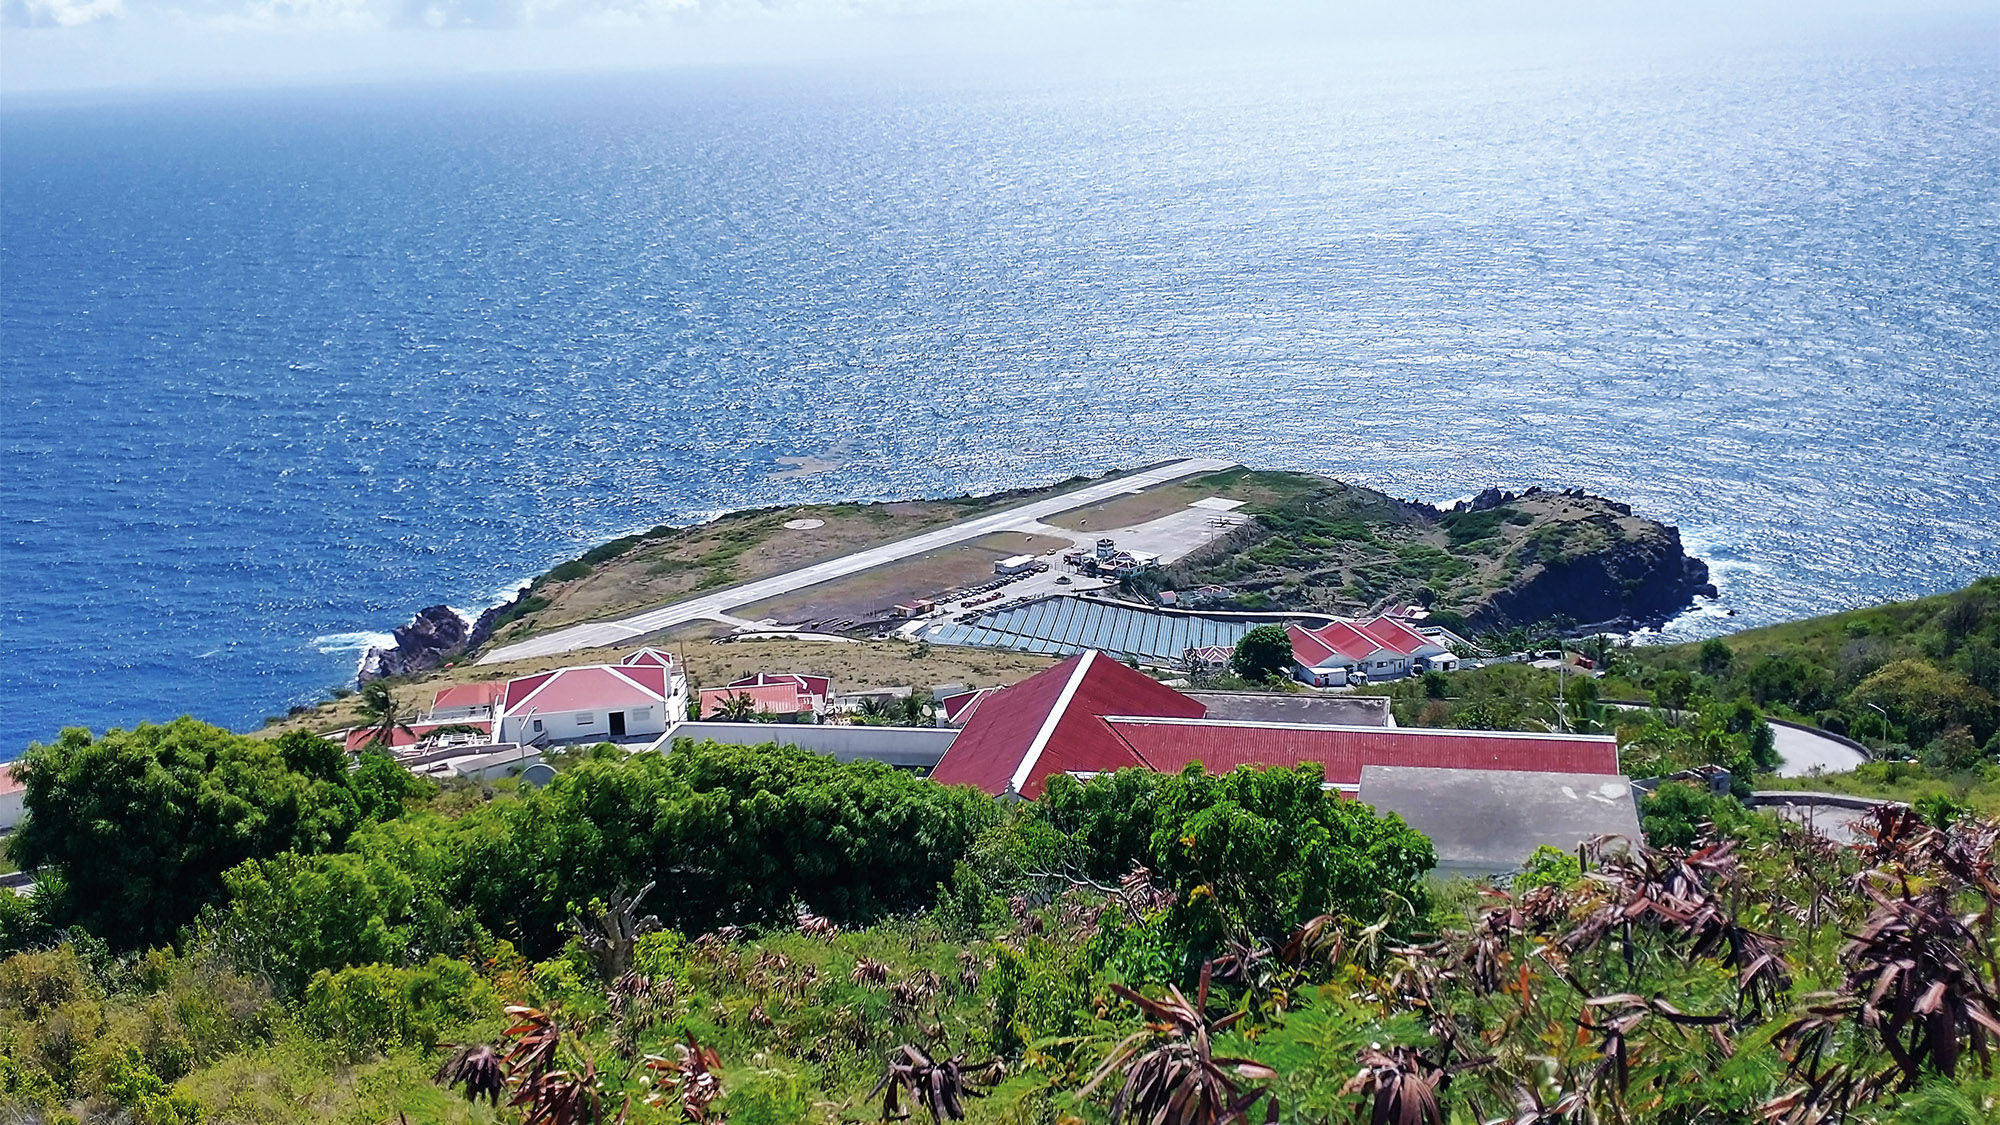 The island's Juancho E. Yrausquin Airport has a short runway that ends in a cliff on each side.